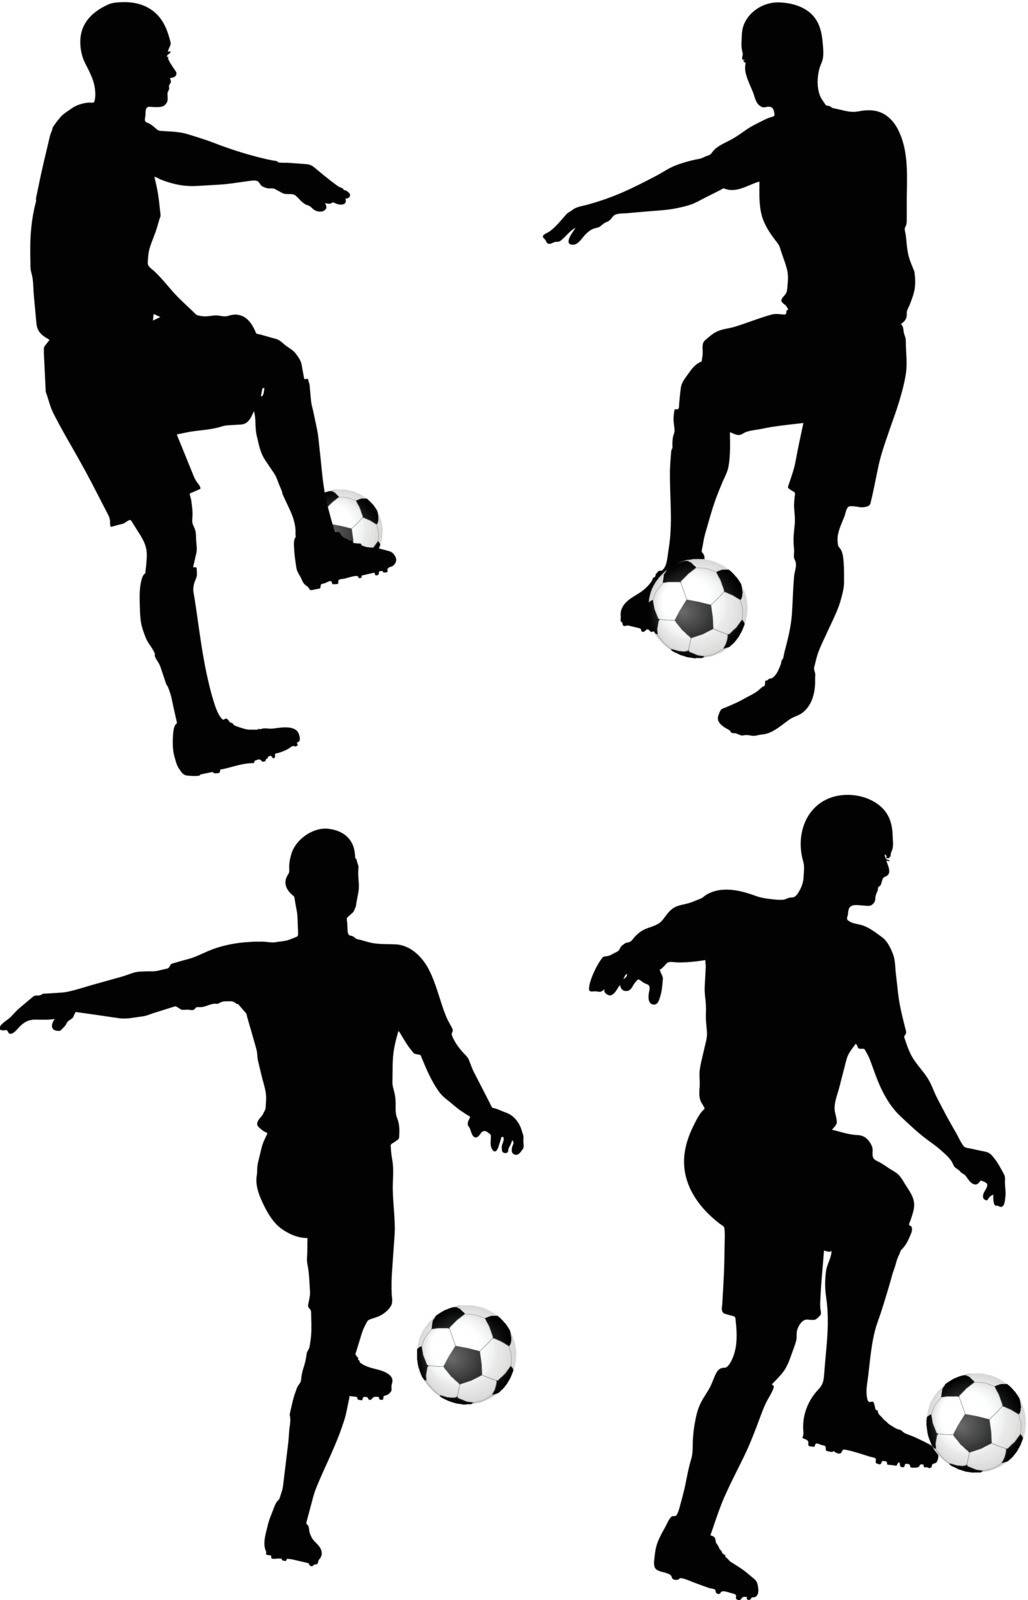 poses of soccer players silhouettes in dribble position by Istanbul2009